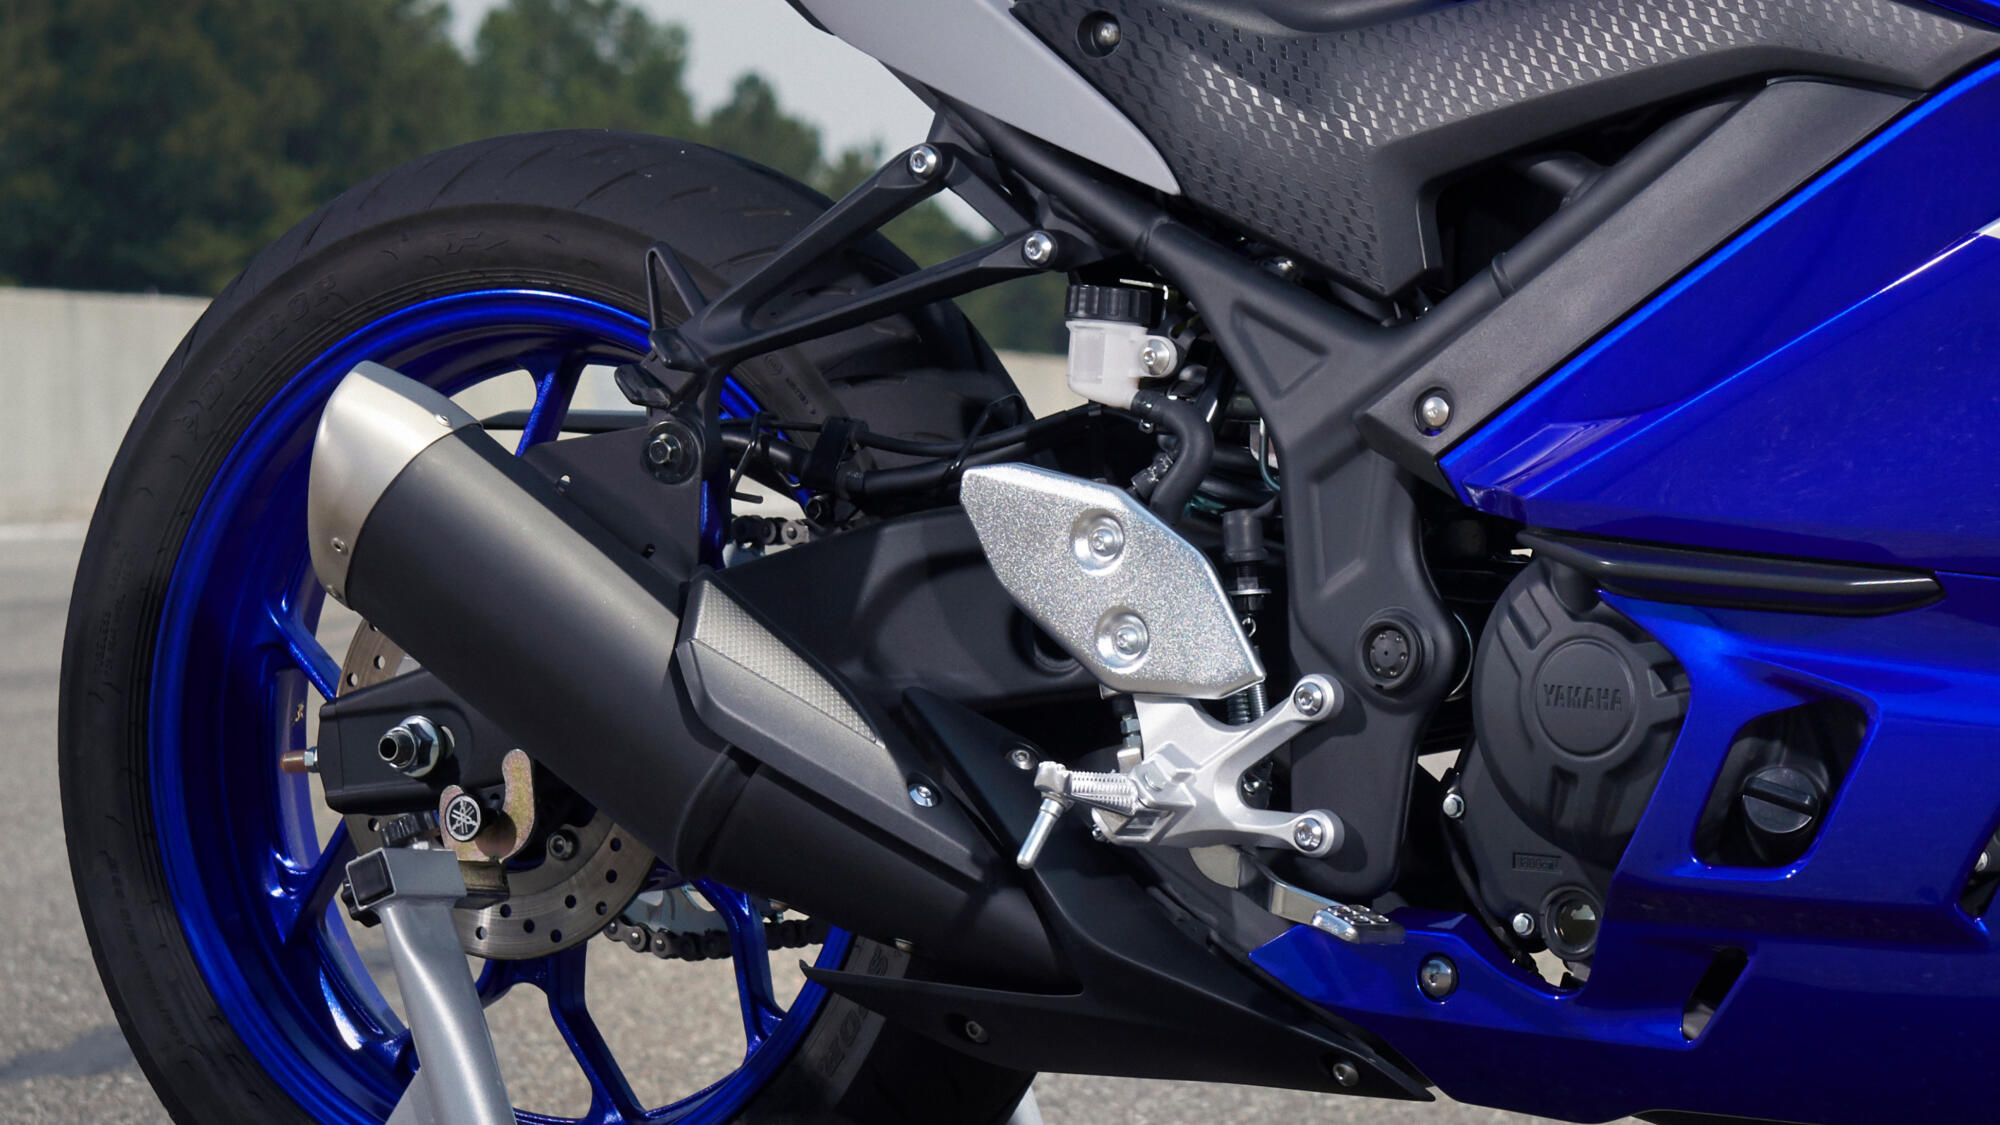 Yamaha R3 Launching in India or Not? - Here's What We Know So Far - photograph